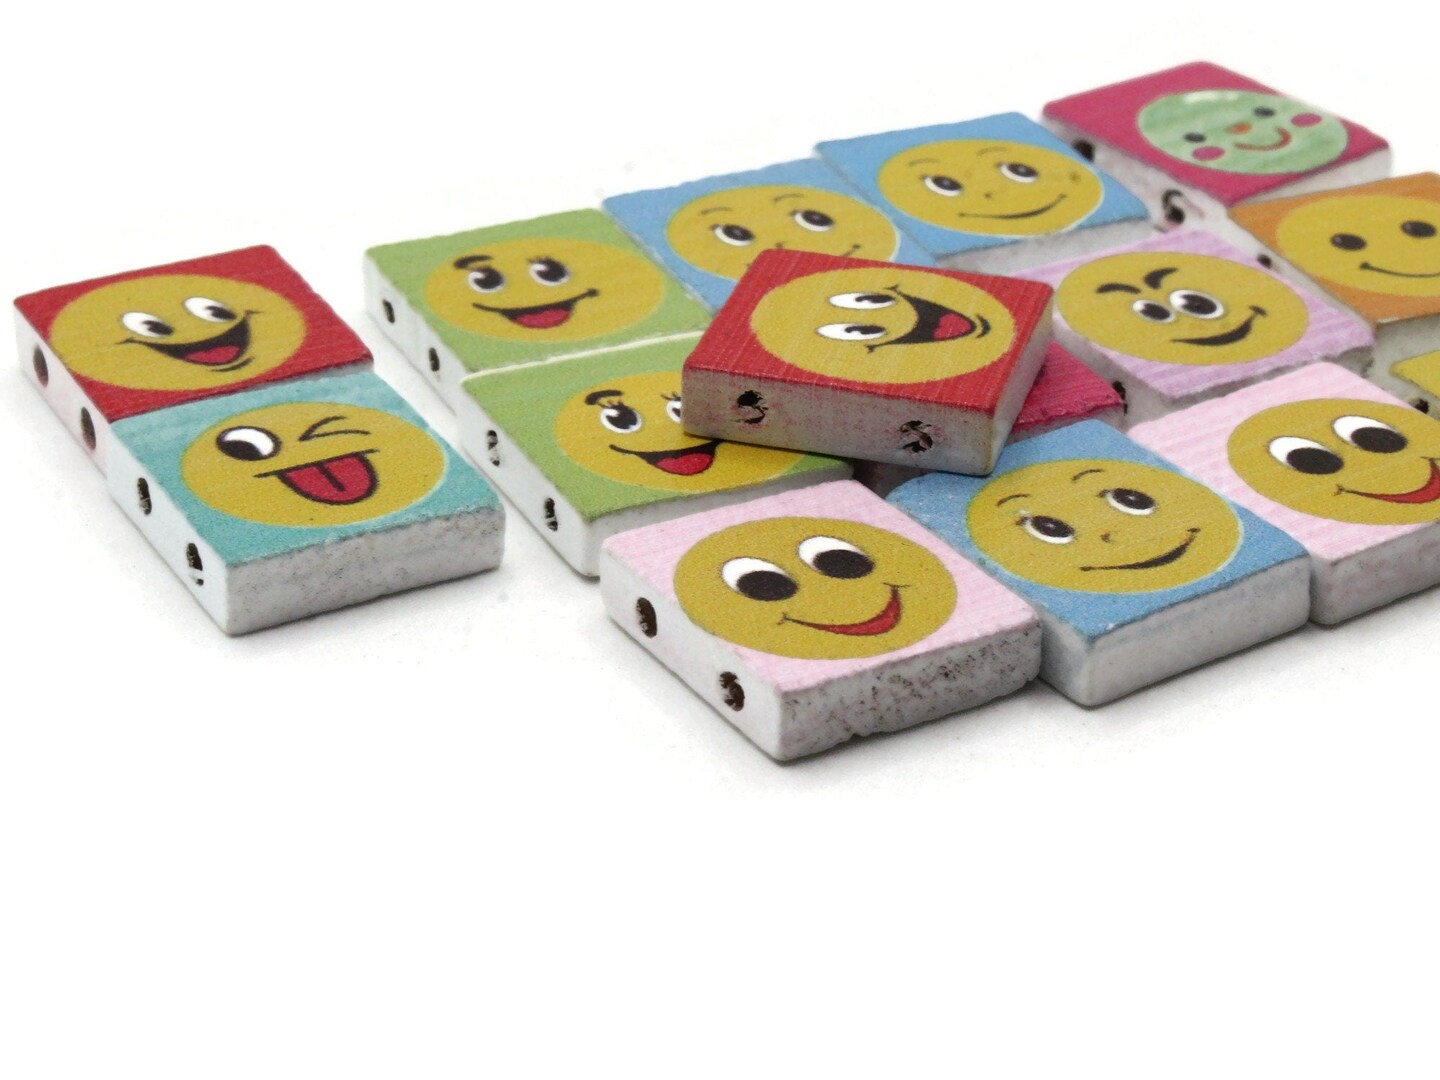 15 20mm Mixed Color Wooden Happy Face Rectangle Beads - Two Hole Emoji Beads